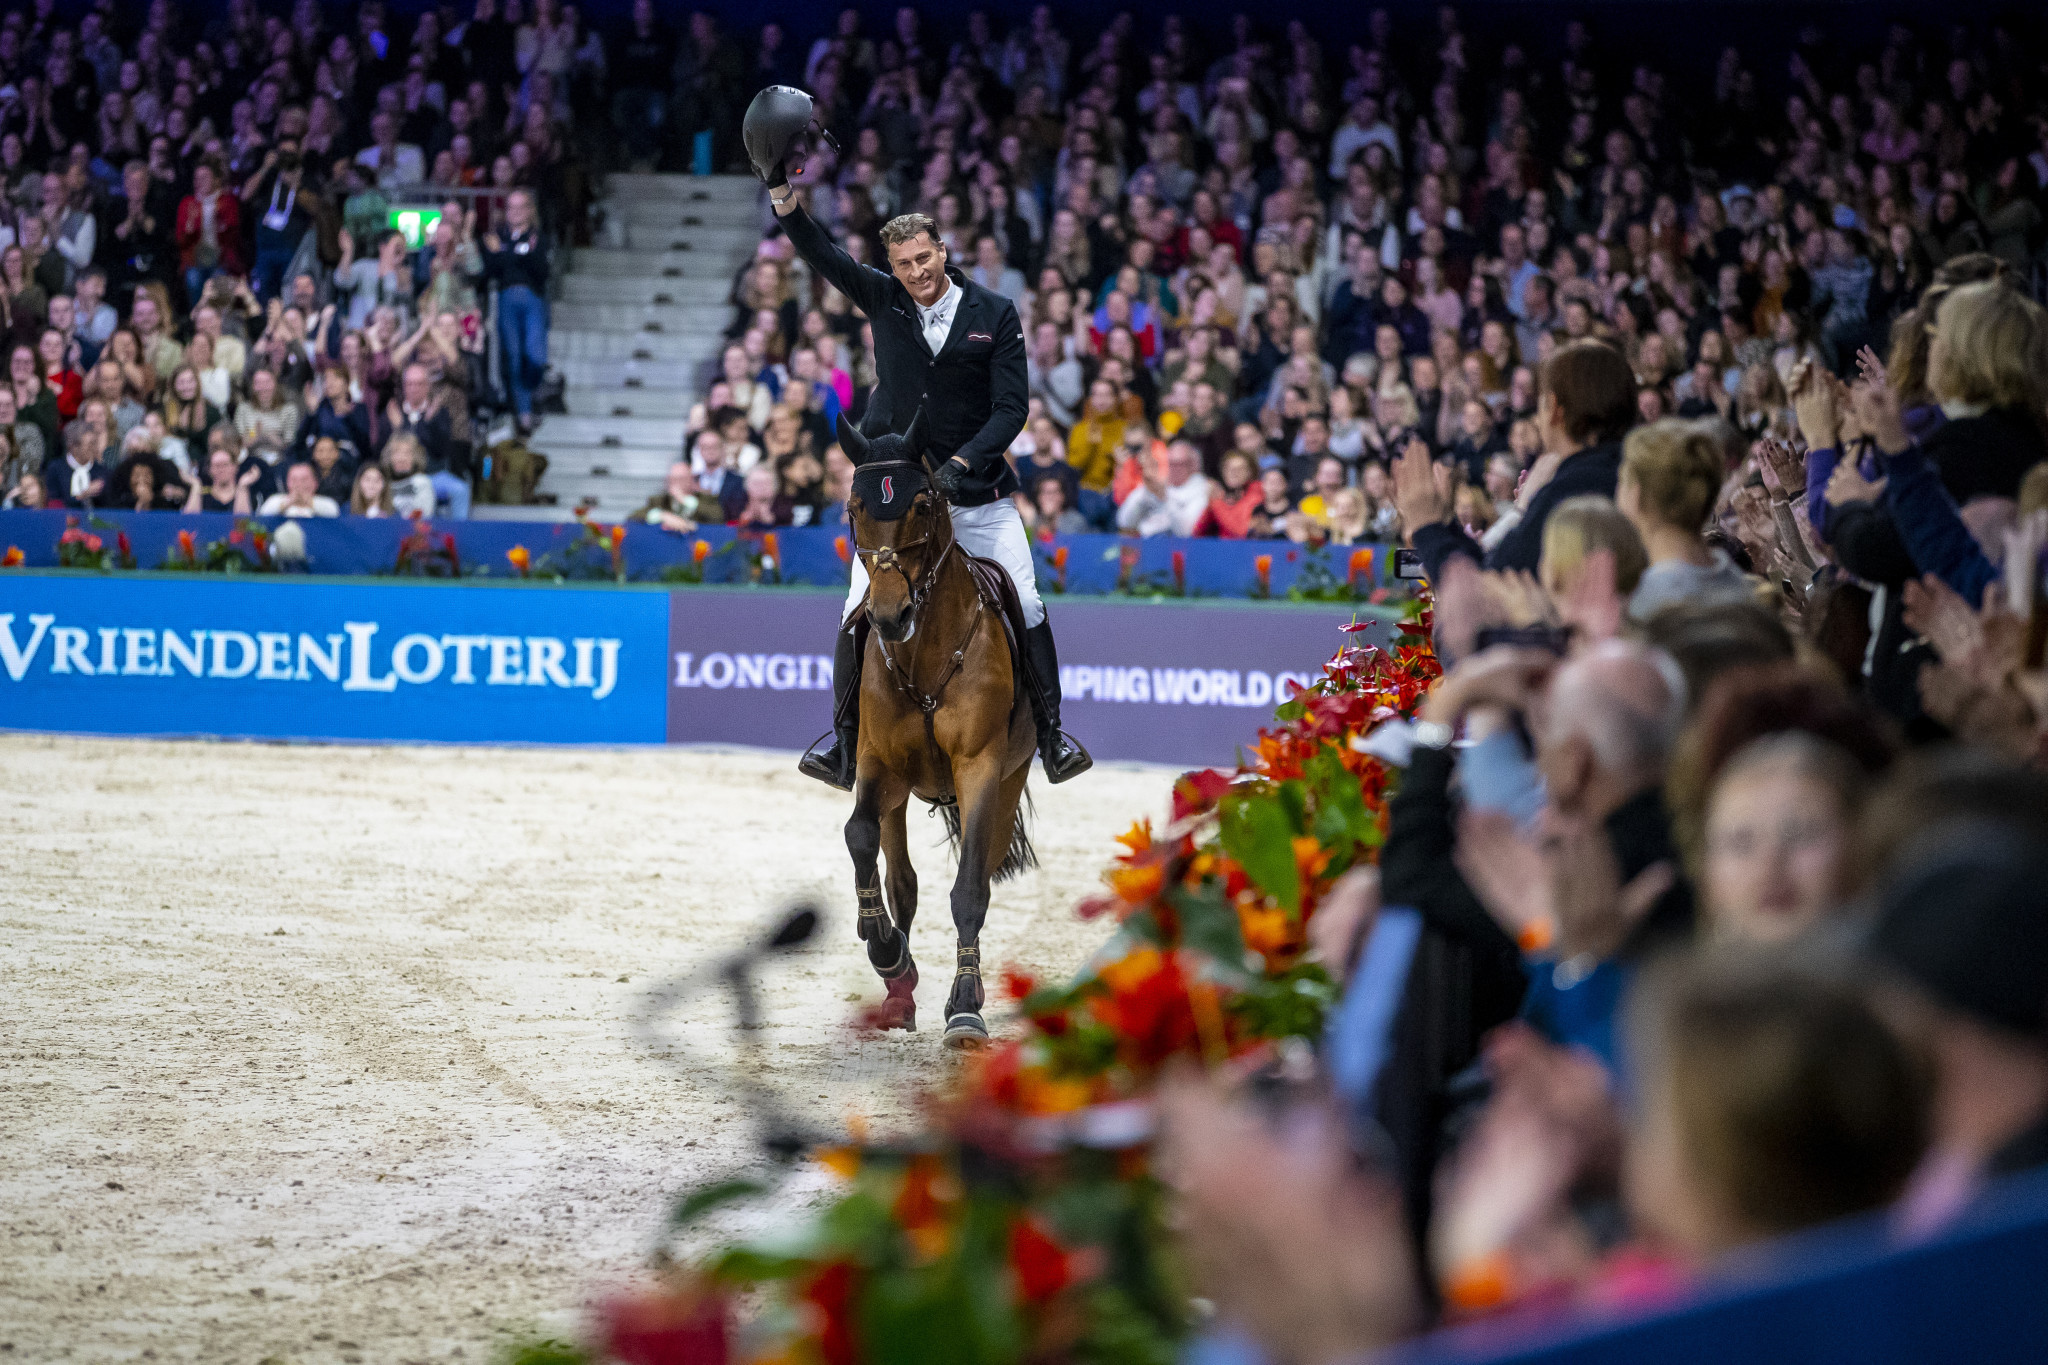 Marc Houtzager prevailed from a nine-rider jump-off ©FEI